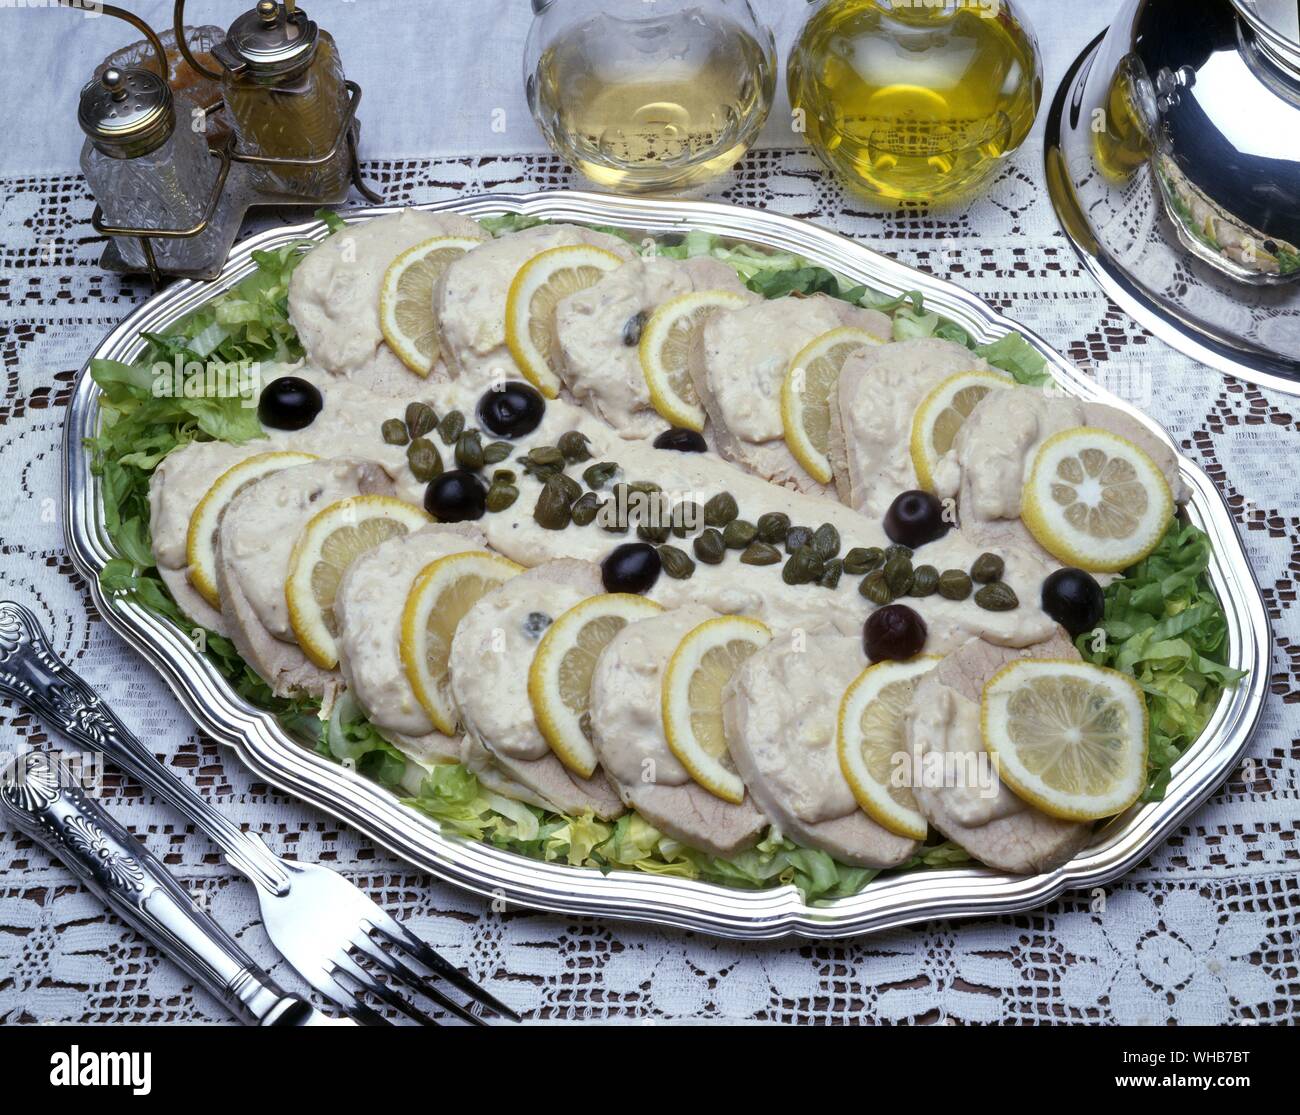 Food well presented on a silver platter - meat, lemon slices, capers, olives, sauce and shredded lettuce - possibly pork loin or ham?. Stock Photo